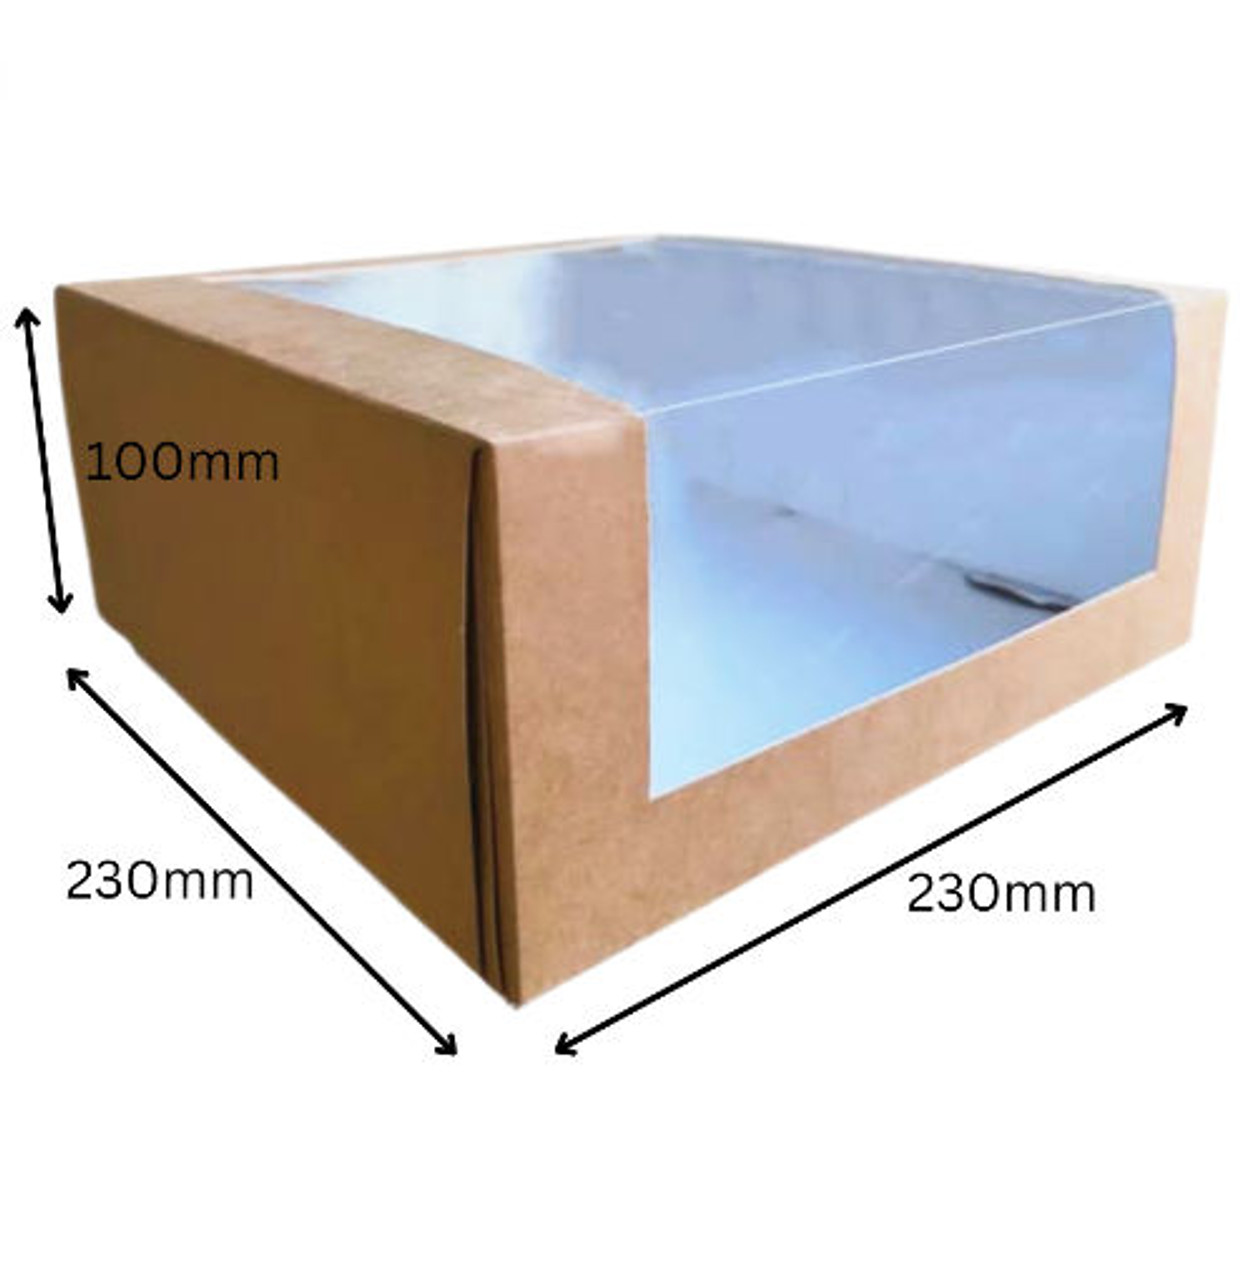 Kraft 9'' Square Cake Box with Window Premium Quality ( see qty options ) with or without Cake Drum